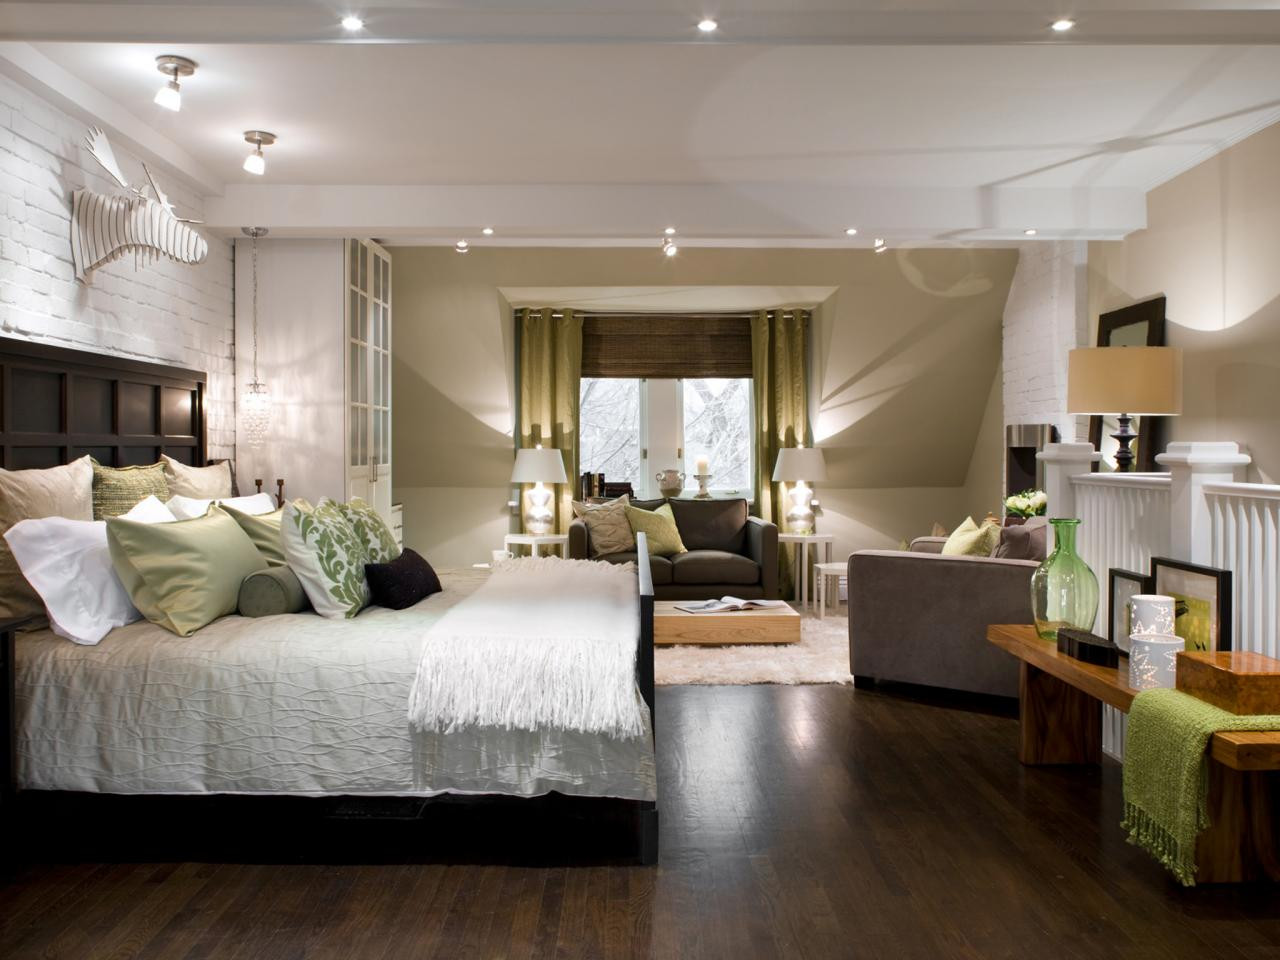 Bedroom Ceiling Lighting
 14 Fresh Bright Lighting Ideas For Every Room In Your Home